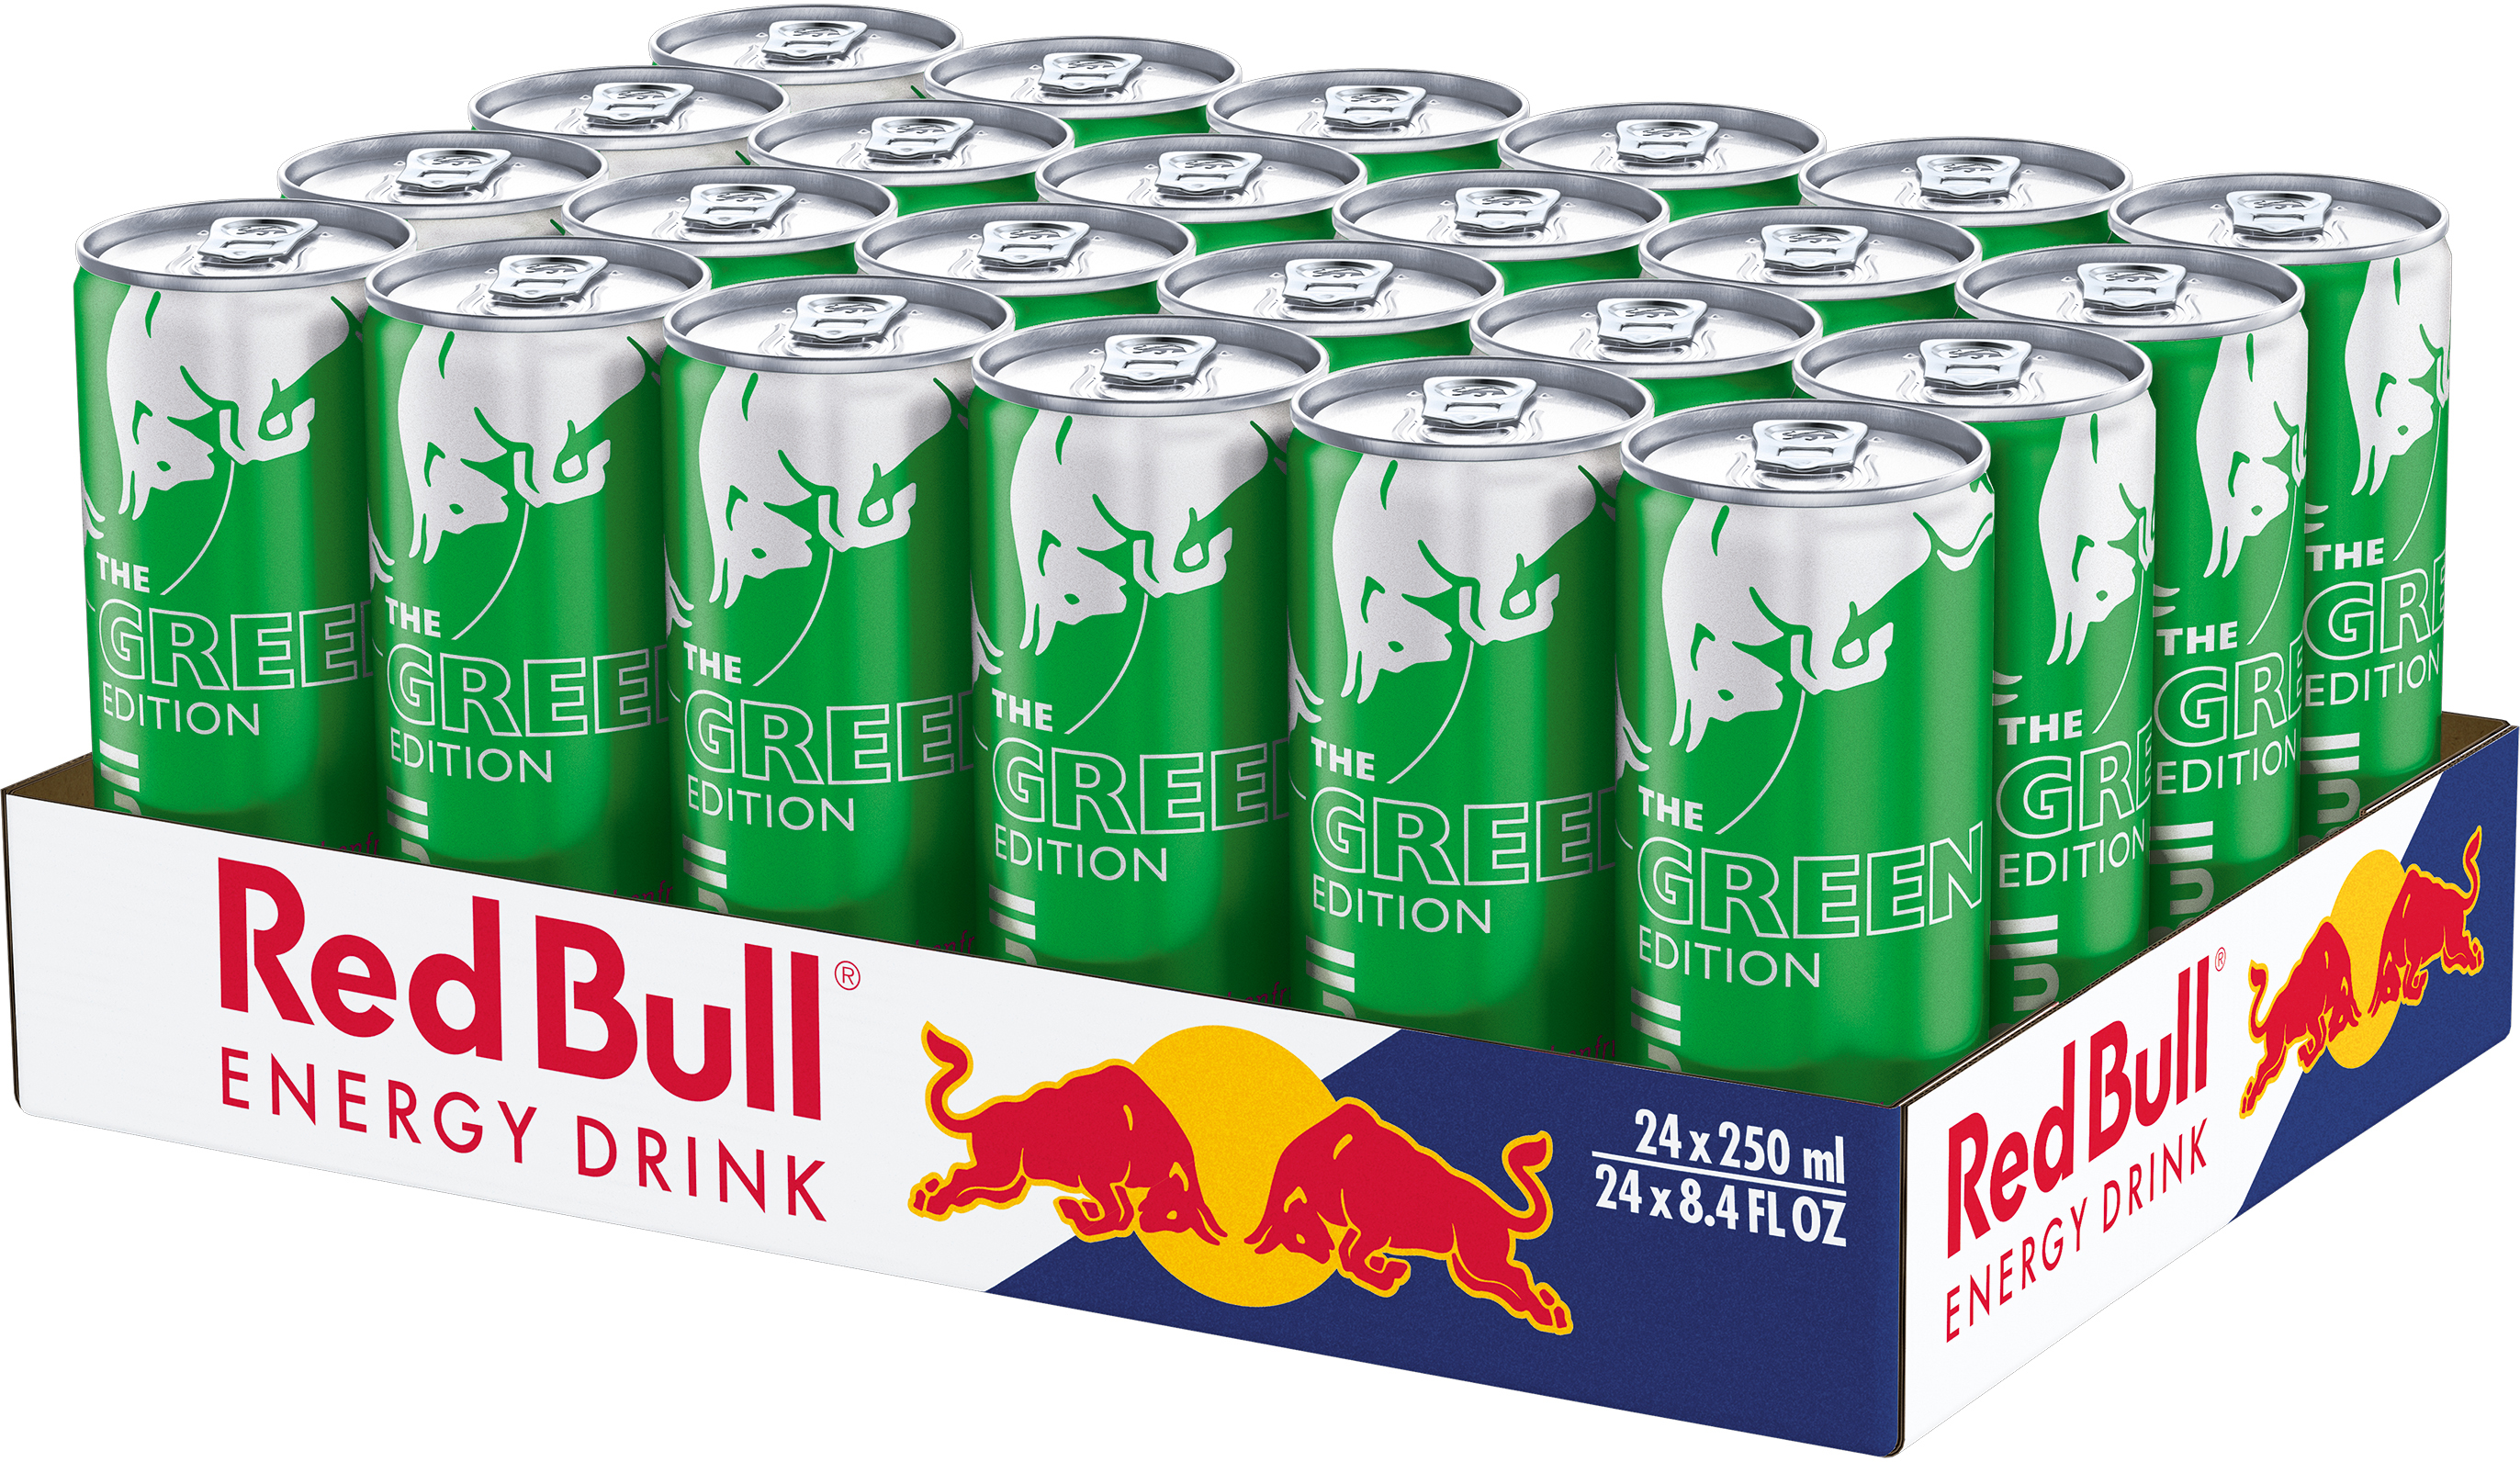 RED BULL Energy Drink Alu 6252 Green Edition 25 cl, 24 pcs. Green Edition 25 cl, 24 pcs.